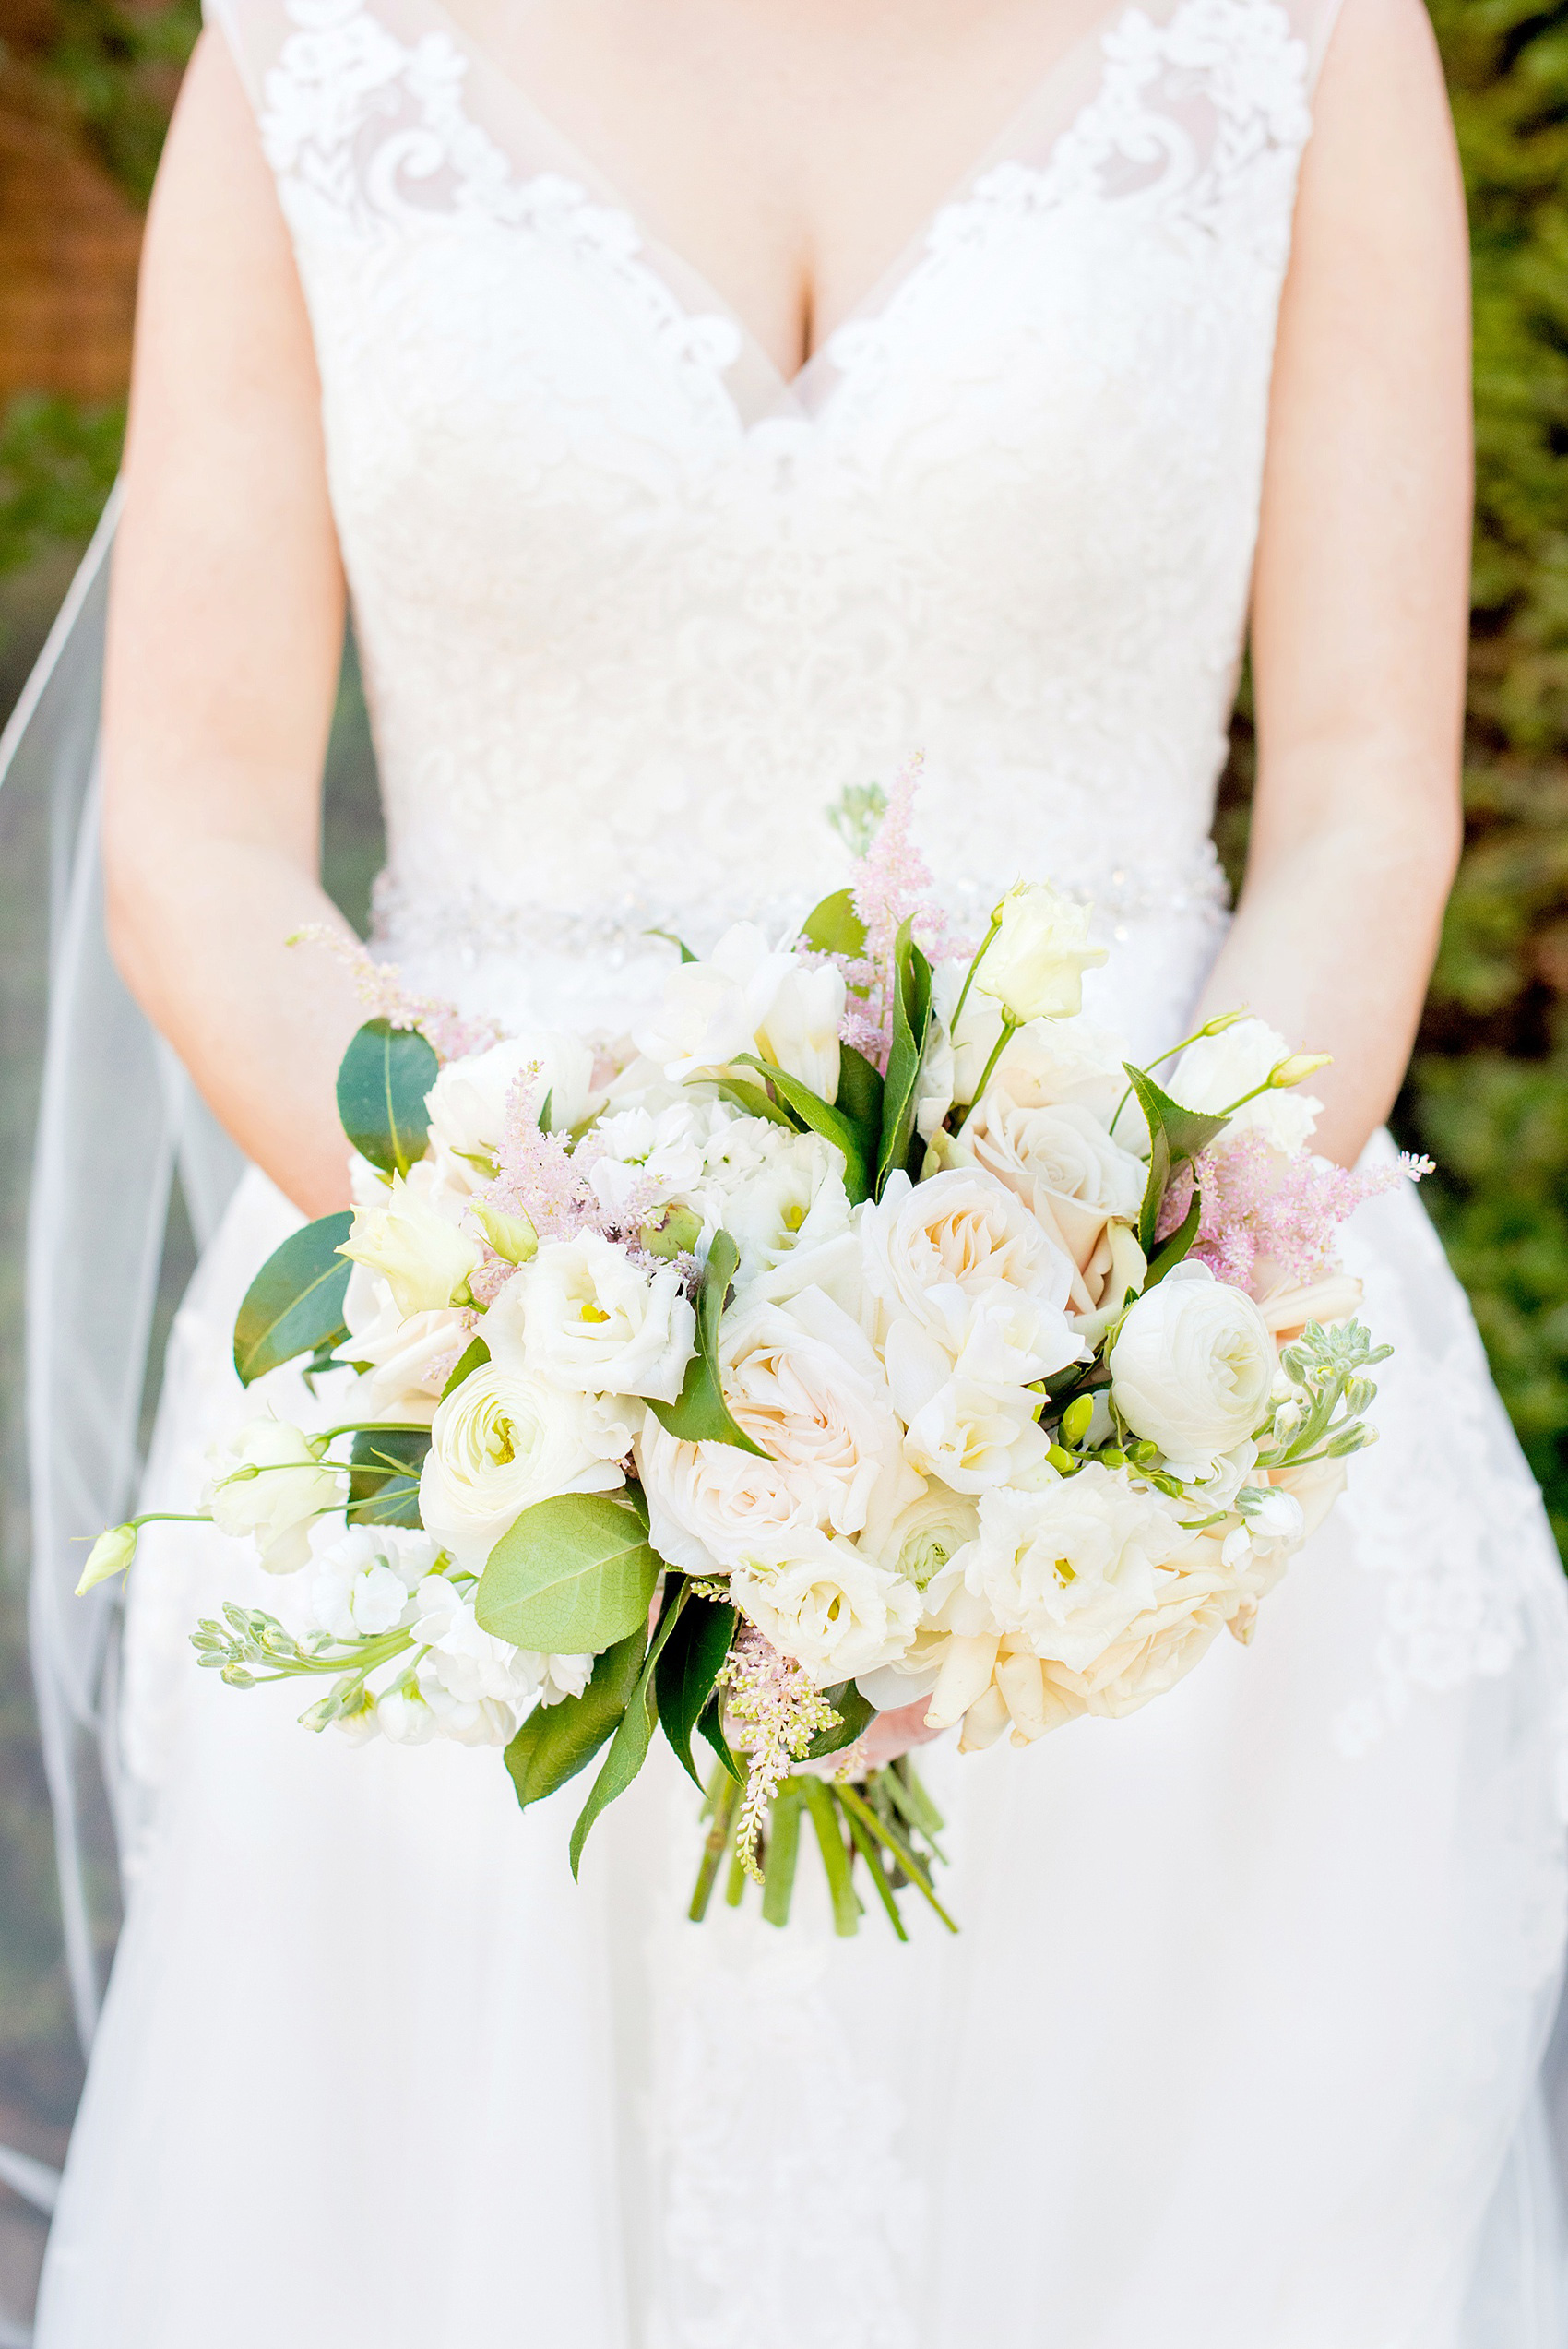 Saratoga Springs destination wedding photos by Mikkel Paige Photography. The carried a bouquet of white roses and lisianthus, ranunculus and pink astilbe for her April spring wedding. #SaratogaSpringsNY #SaratogaSprings #mikkelpaige #NYwedding #destinationwedding 